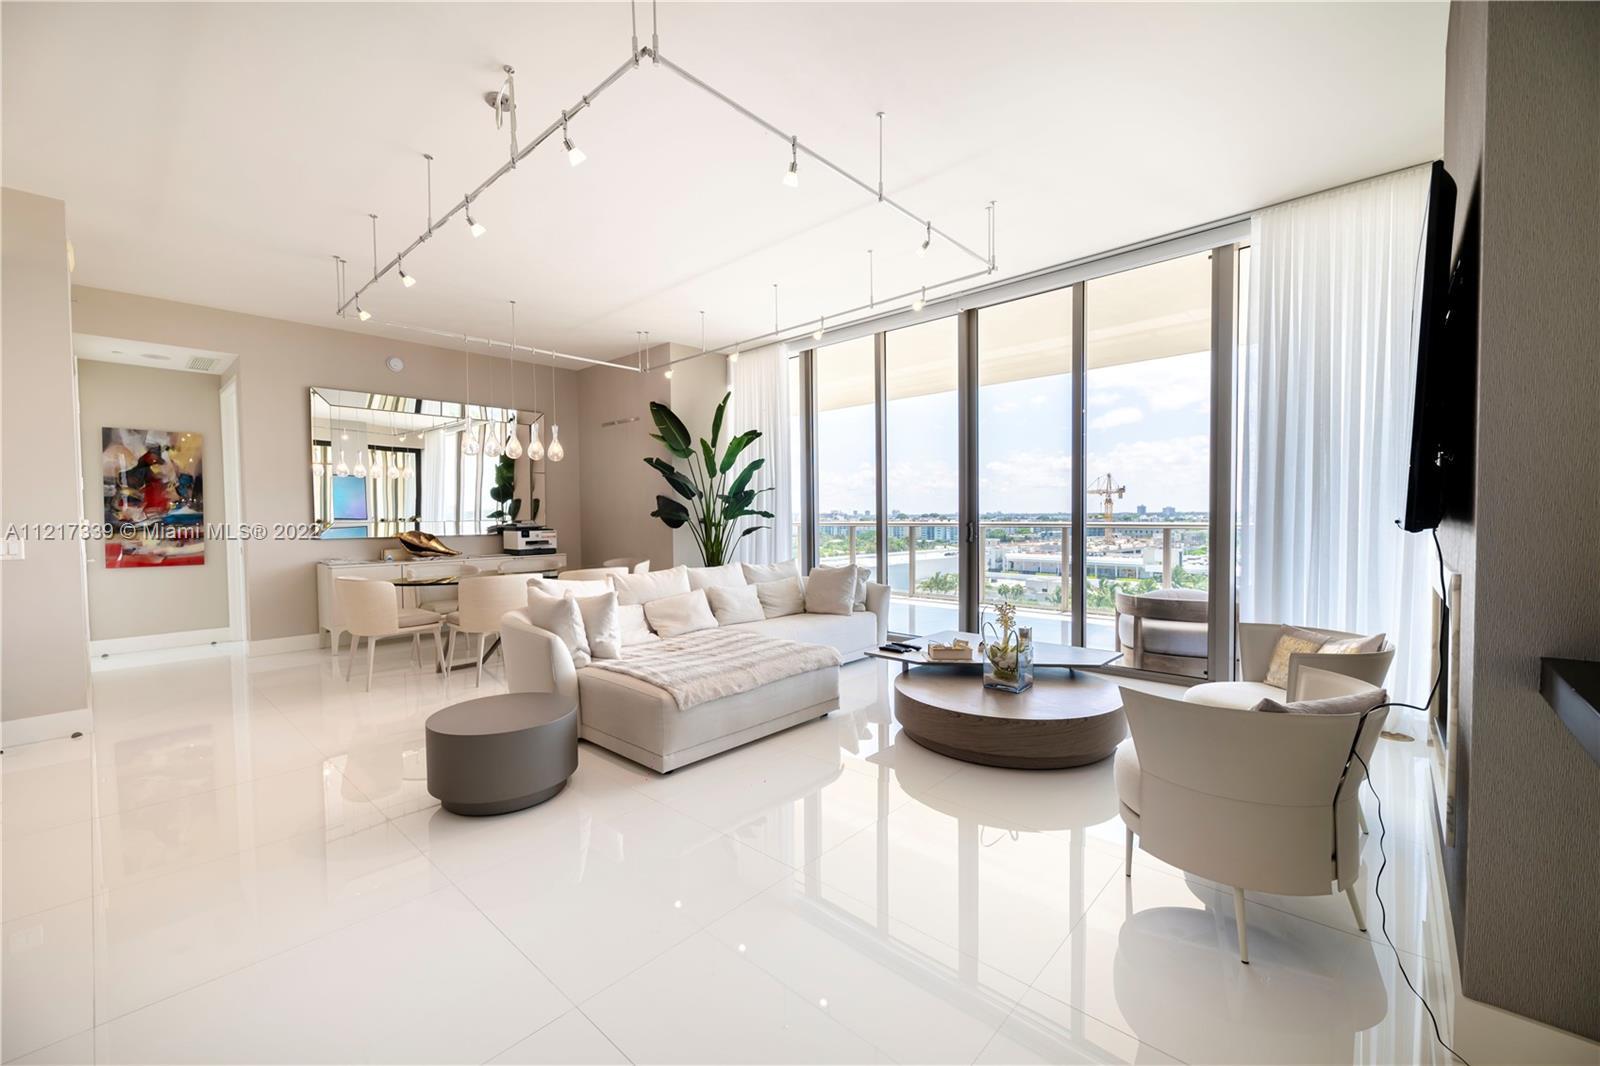 Remodeled 2 bedroom - 2.5 bathroom unit at St Regis Residences in Bal Harbour.
This unit features a